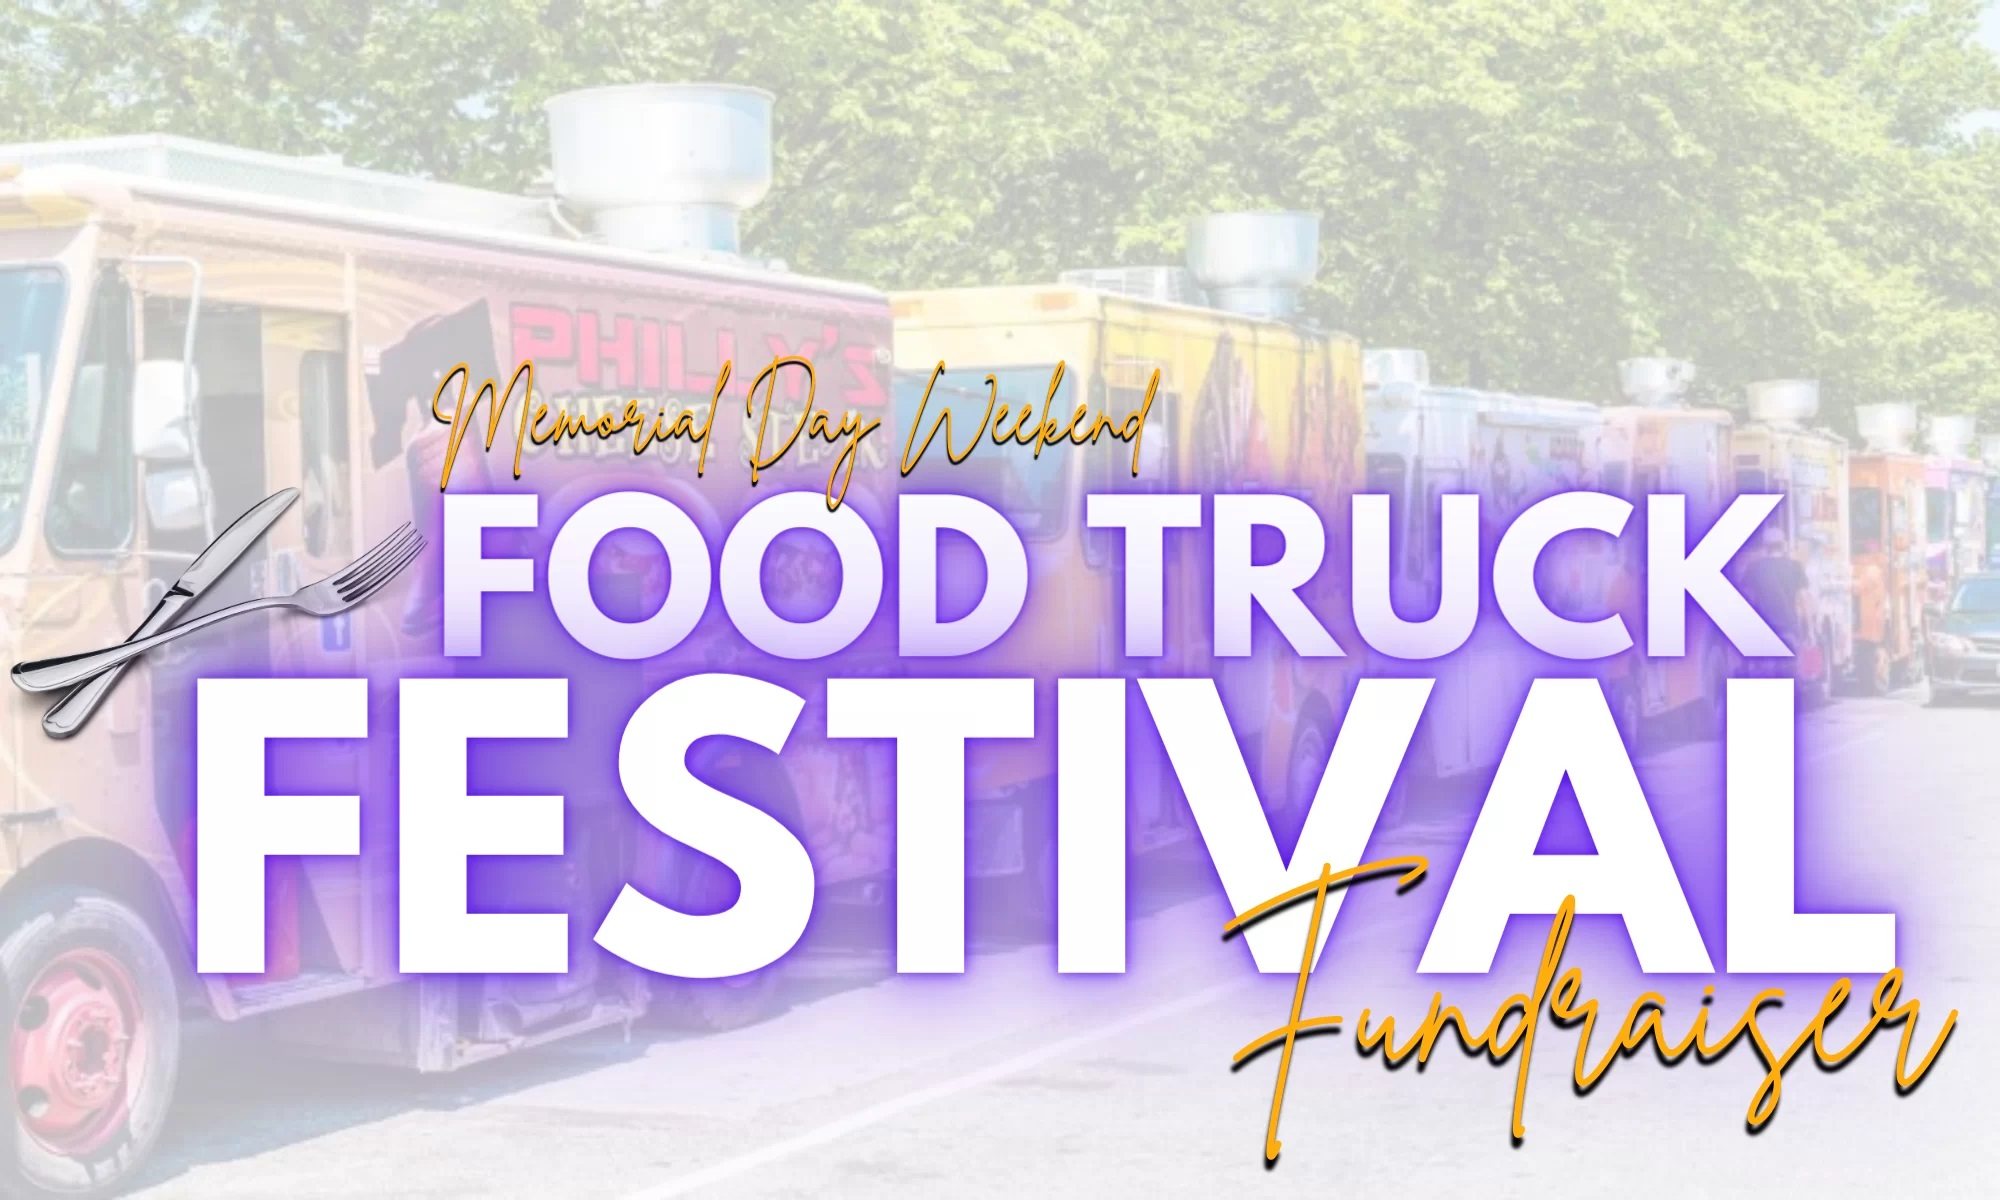 16-captivating-facts-about-food-truck-festival-fundraiser